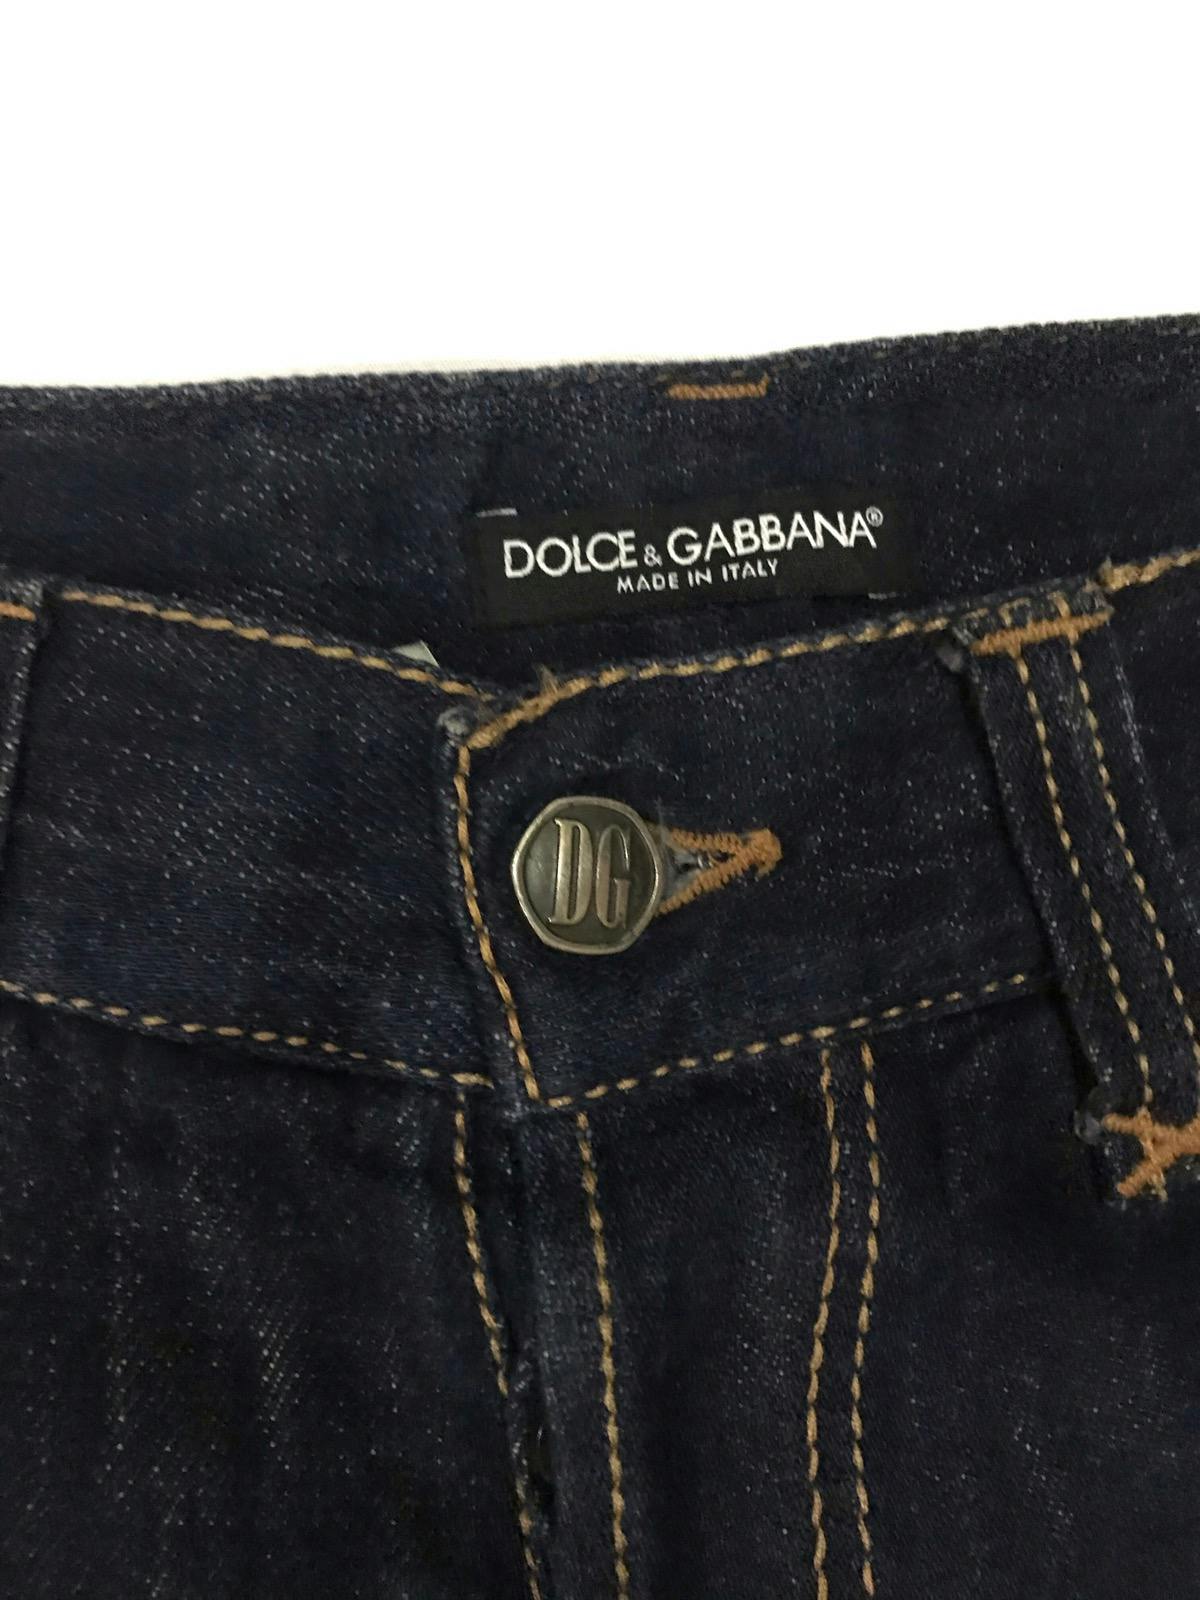 Dolce & Gabanna D&G 17 Loose Denim Jeans Made in Italy 🇮🇹 - 4